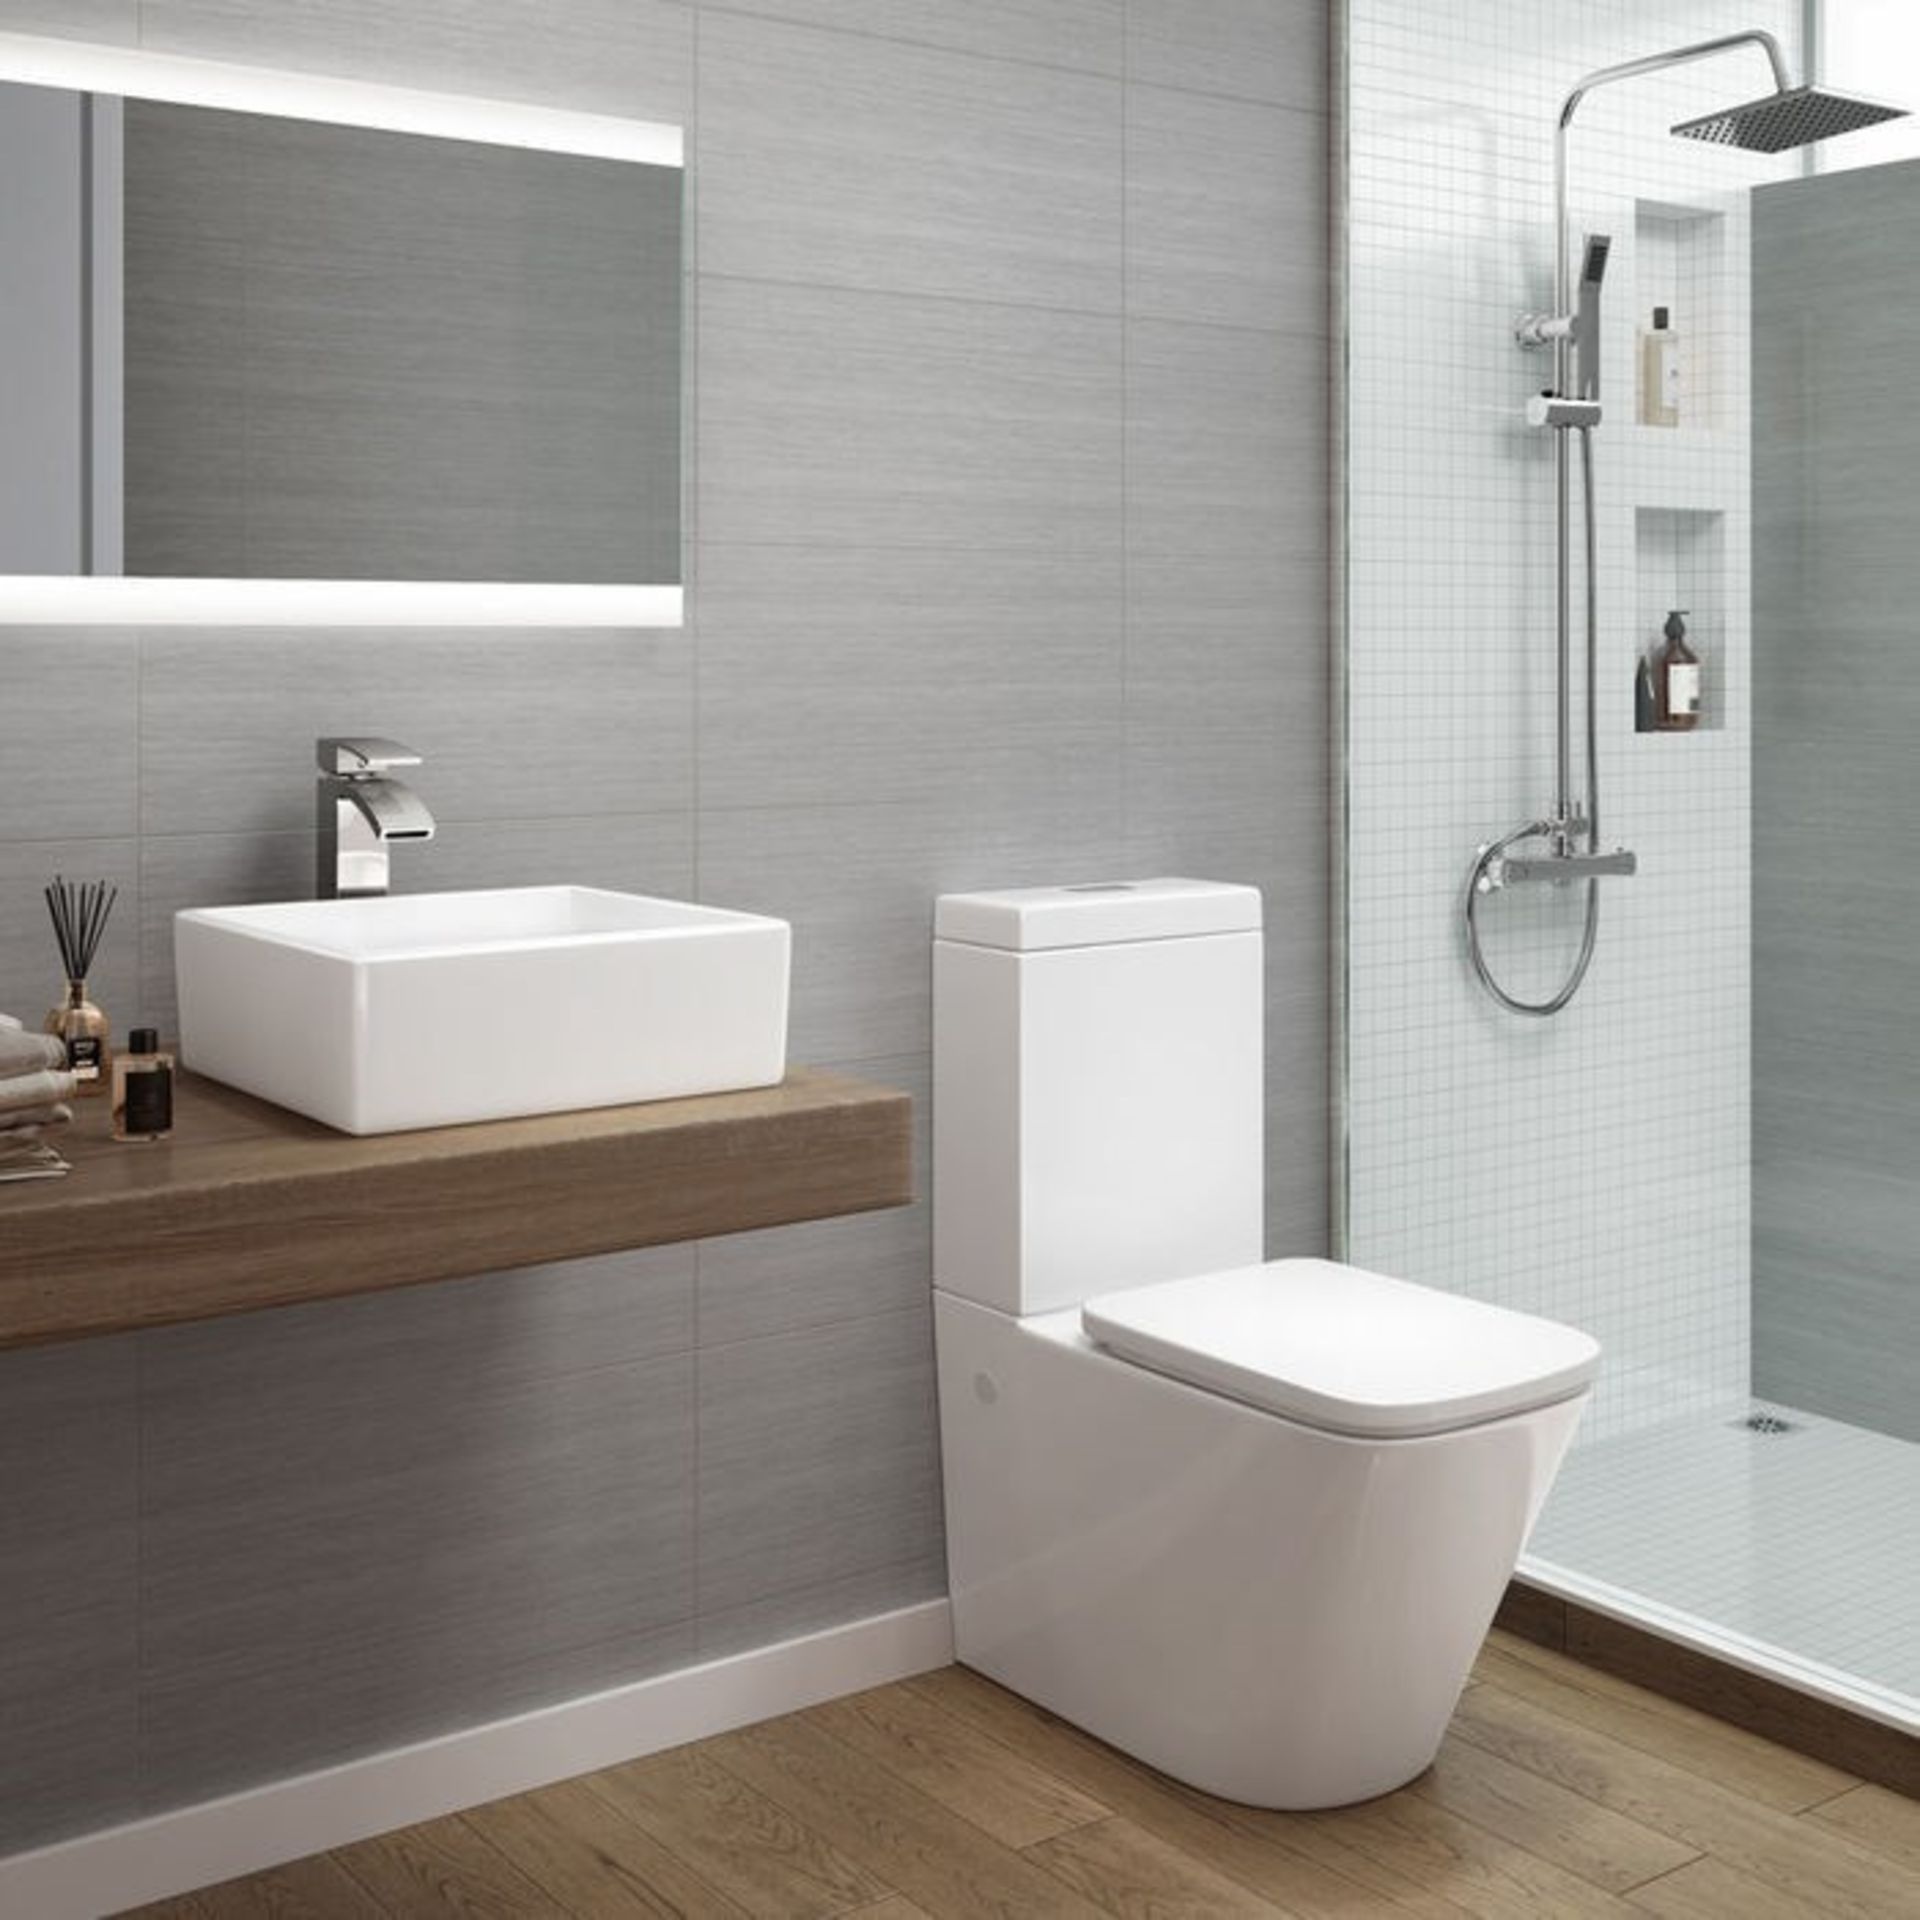 Florence Close Coupled Toilet & Cistern inc Soft Close Seat. Contemporary design finished... - Image 2 of 2